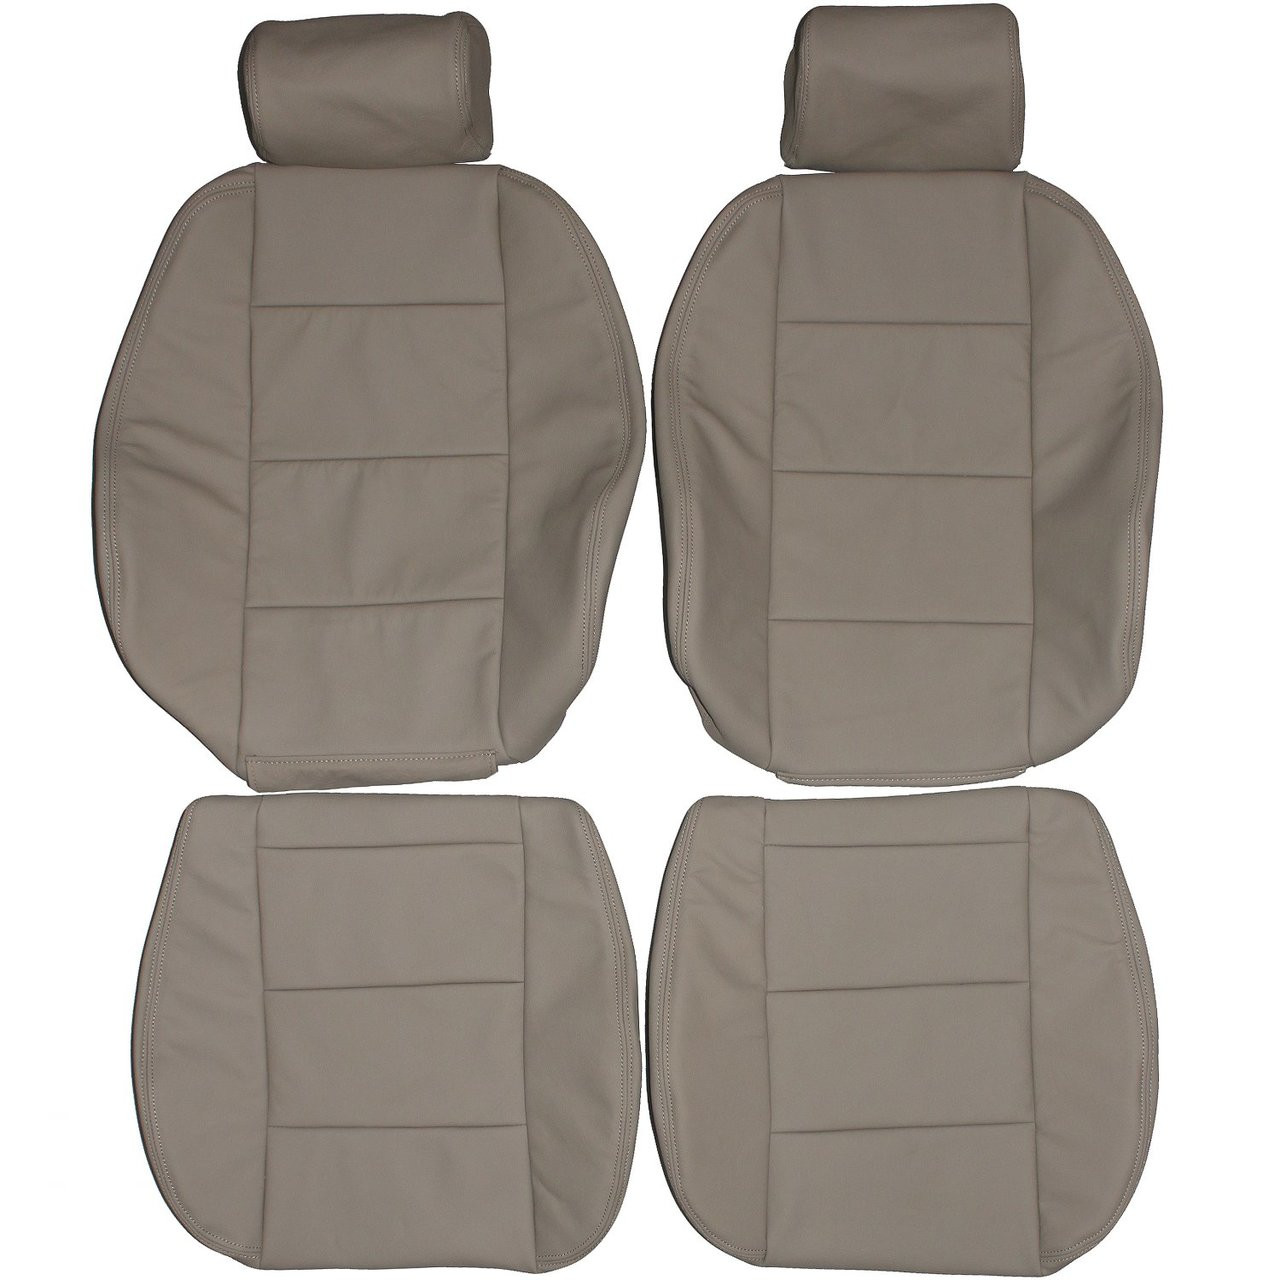 1992-1998 BMW E36 Convertible Standard Custom Real Leather Seat Covers  (Front) - Lseat.com